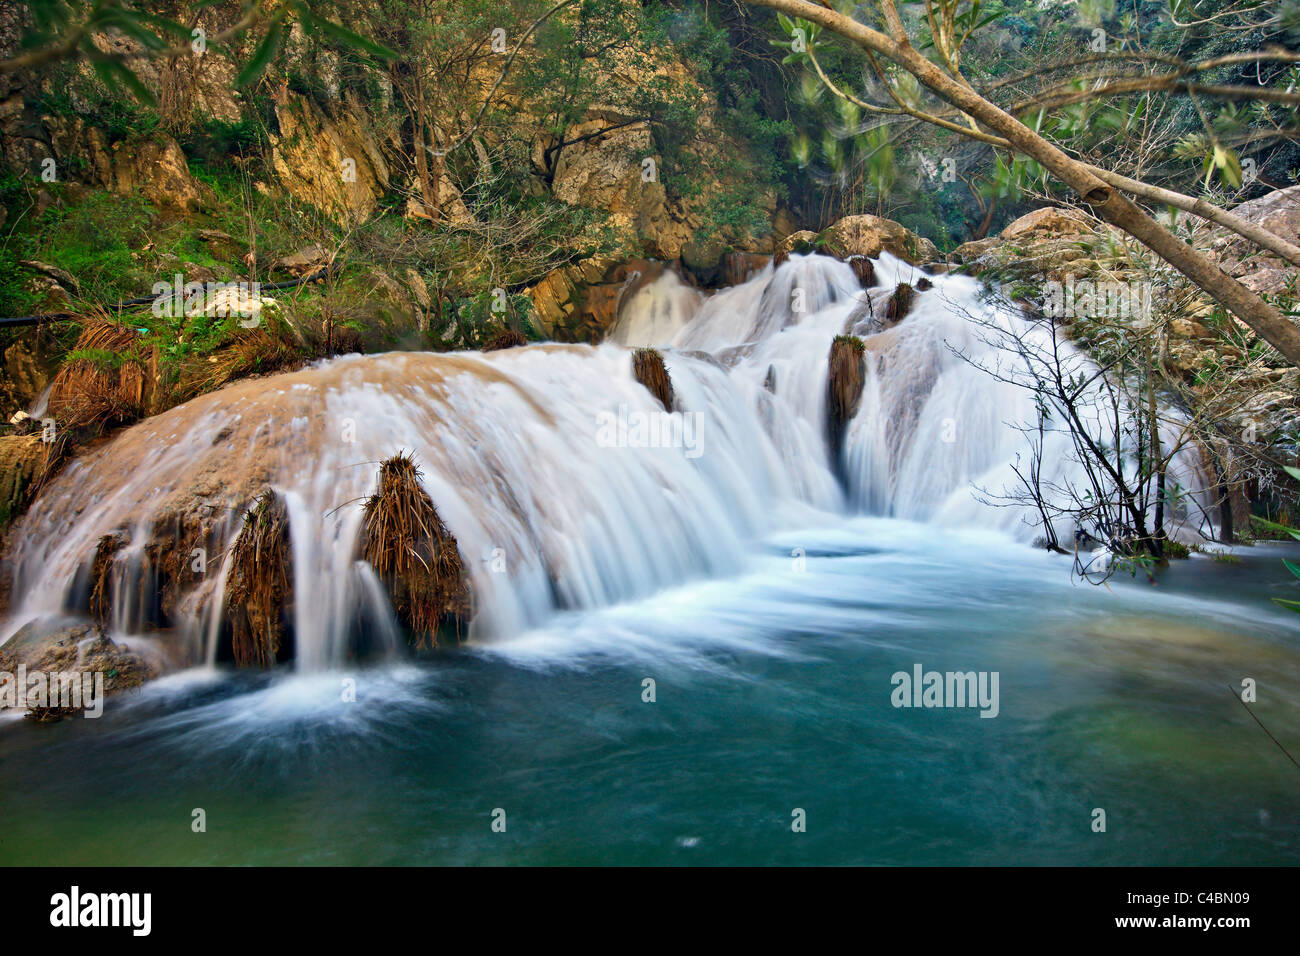 One of the many waterfalls at Polylimnio, a place of exceptional natural beauty at Messinia prefecture, Peloponnese, Greece Stock Photo